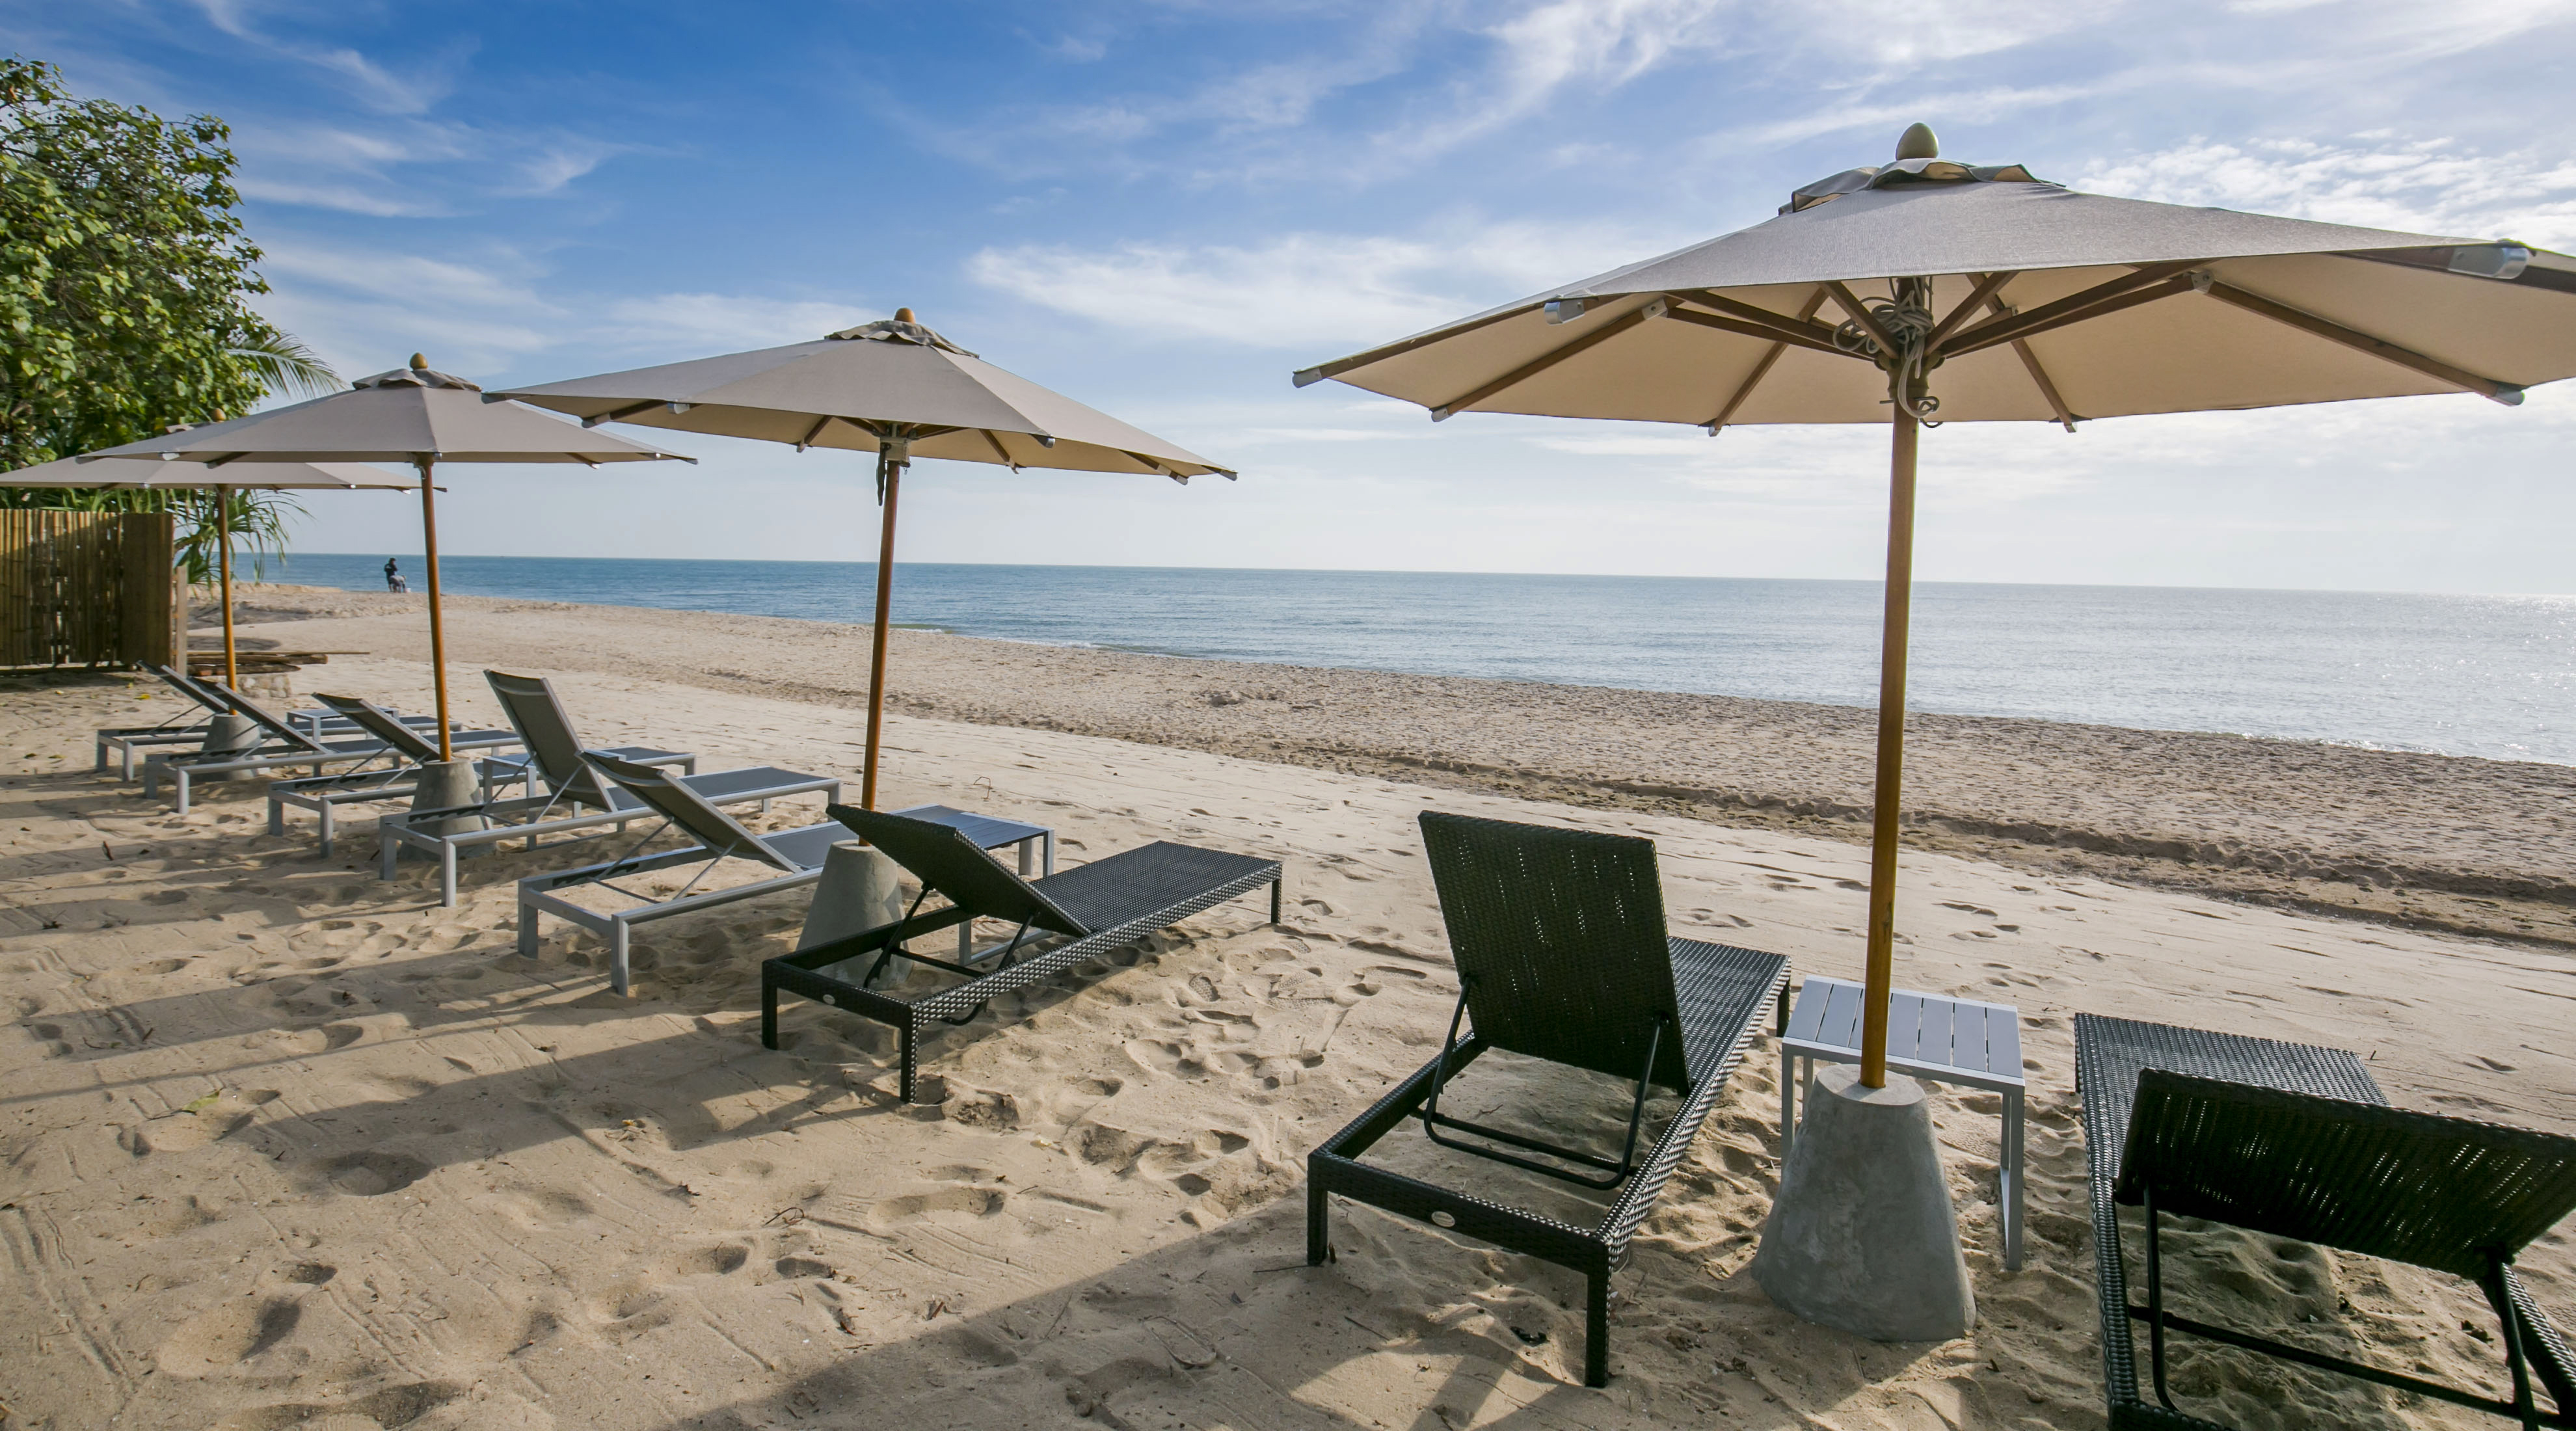 Photo of Q Seaside Huahin Beach - popular place among relax connoisseurs